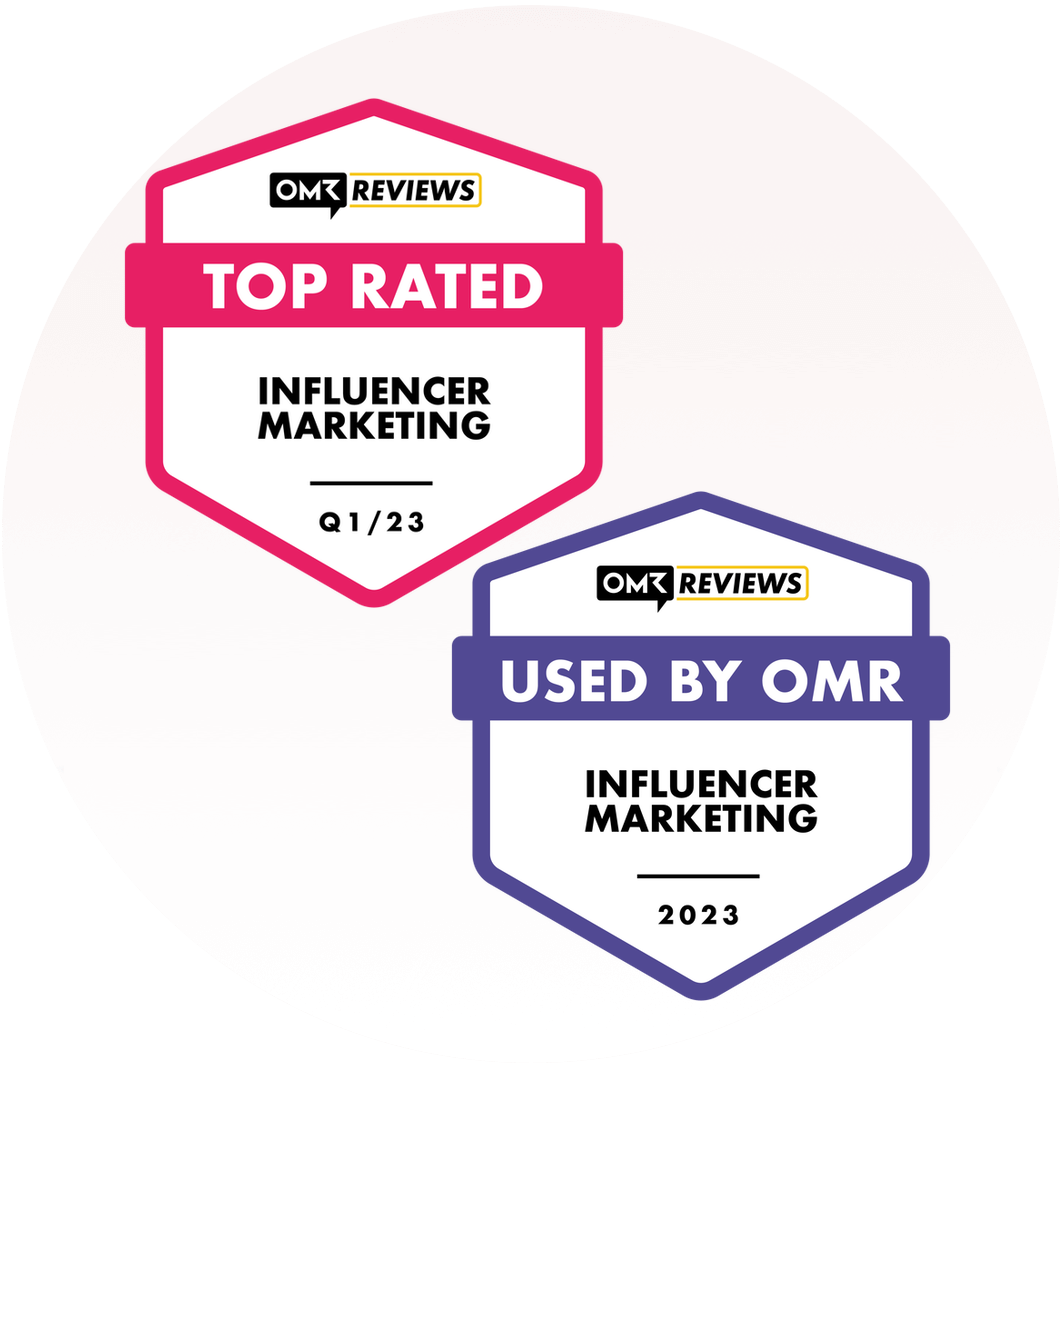 OMR Top Rated Influencer-Marekting Tool Badge Q1 2023 and Used by OMR Badge 2023 for influData